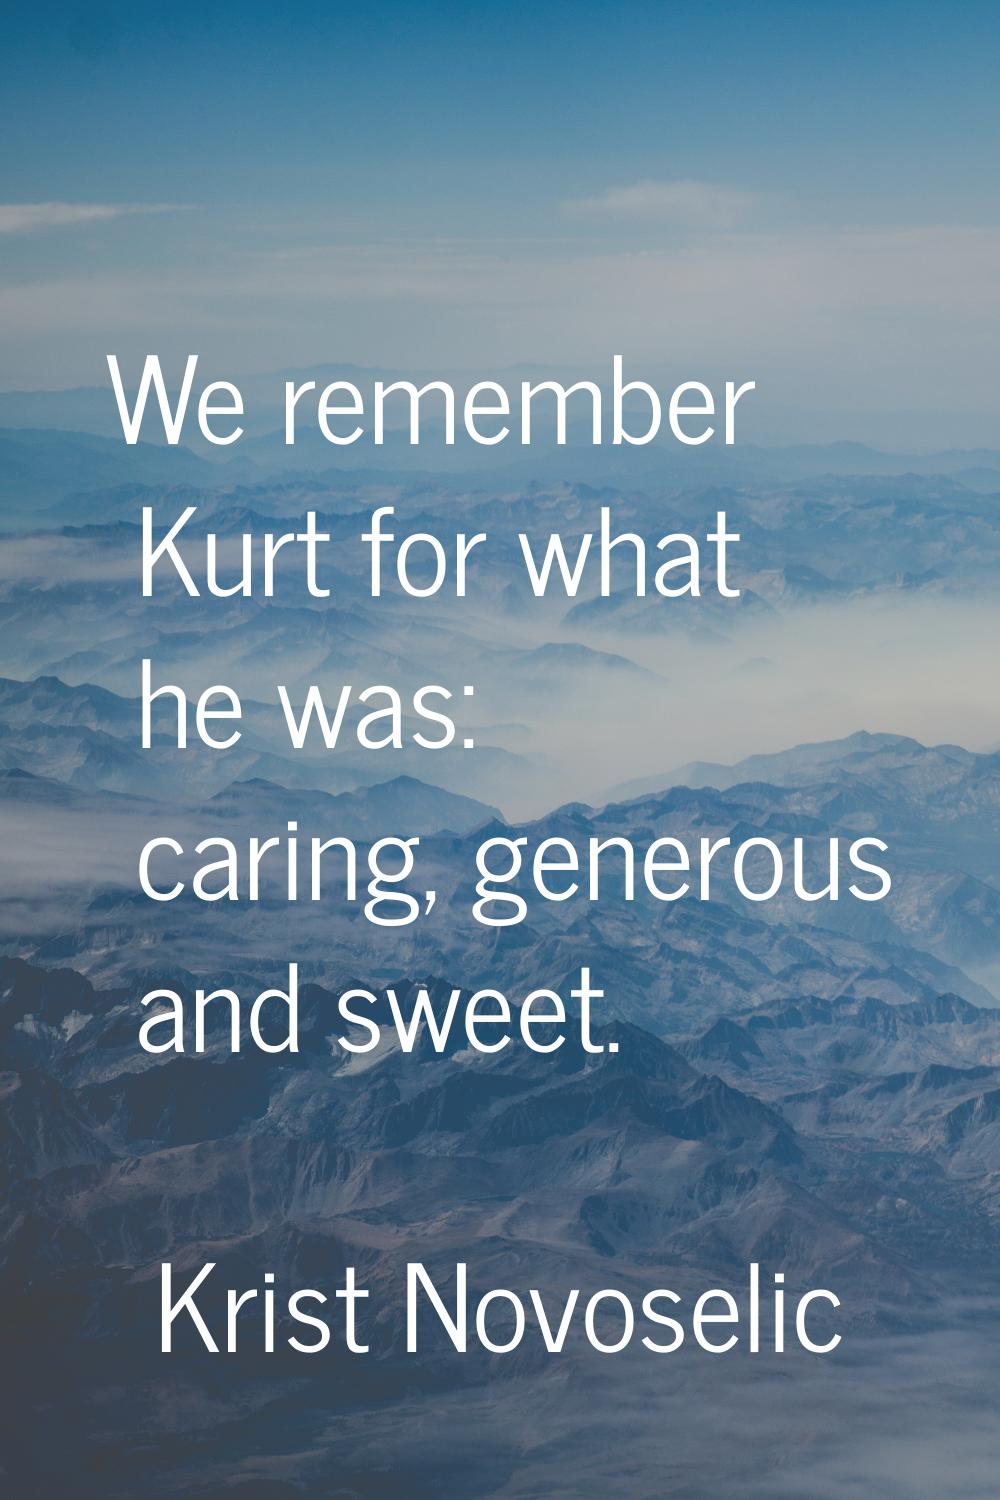 We remember Kurt for what he was: caring, generous and sweet.